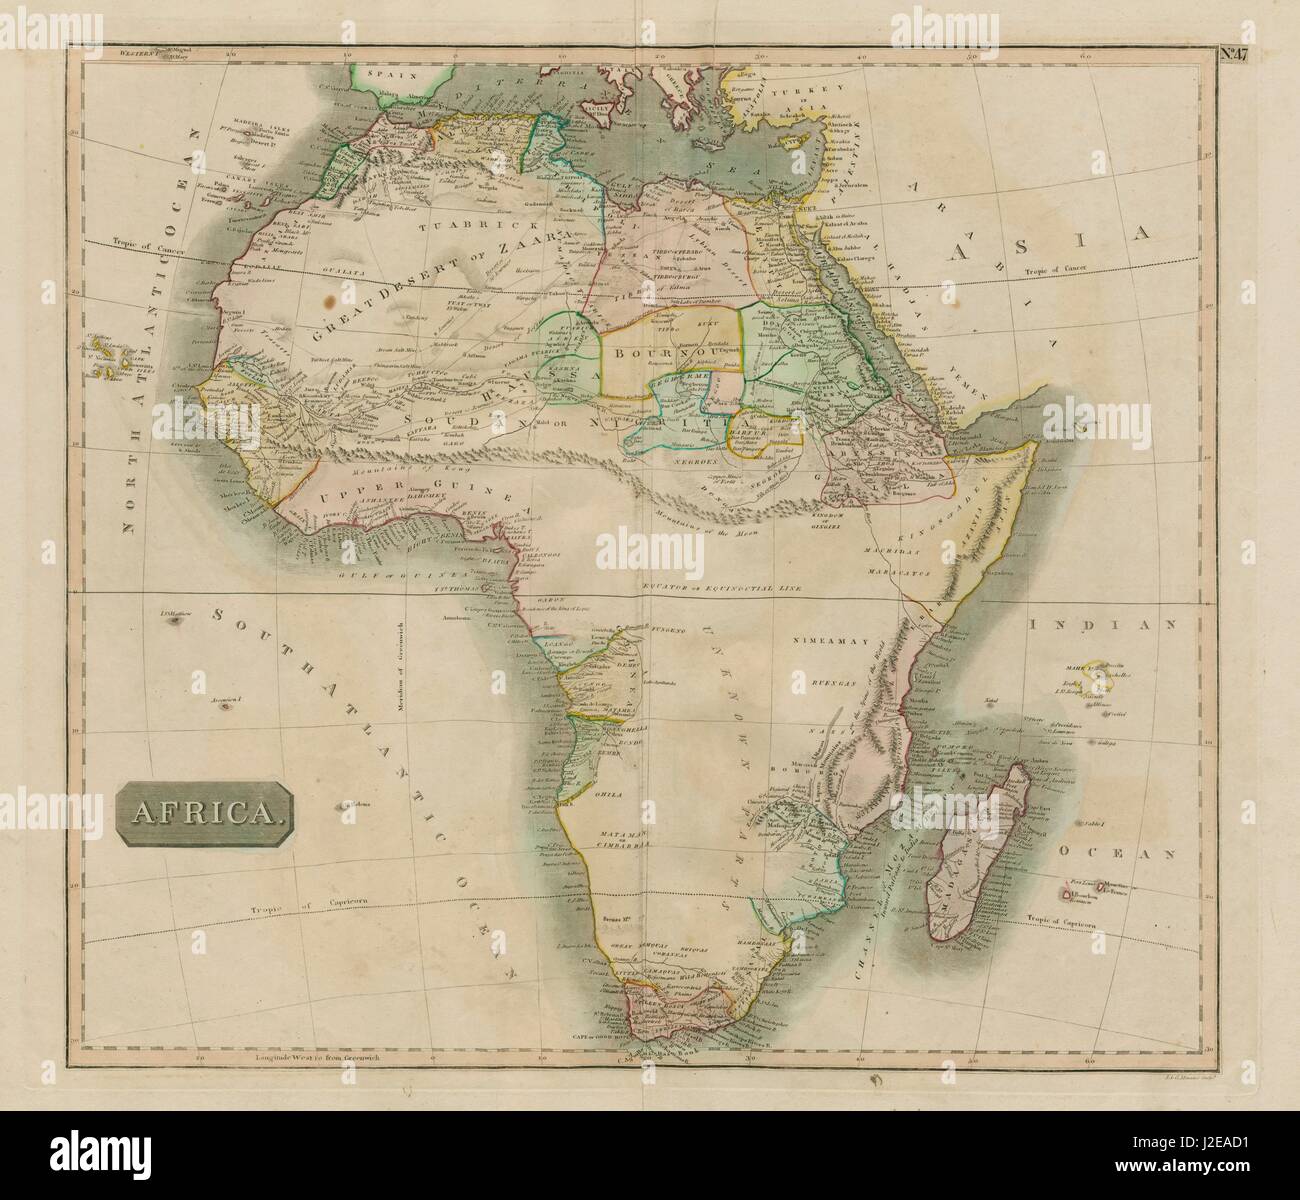 africa before colonialism